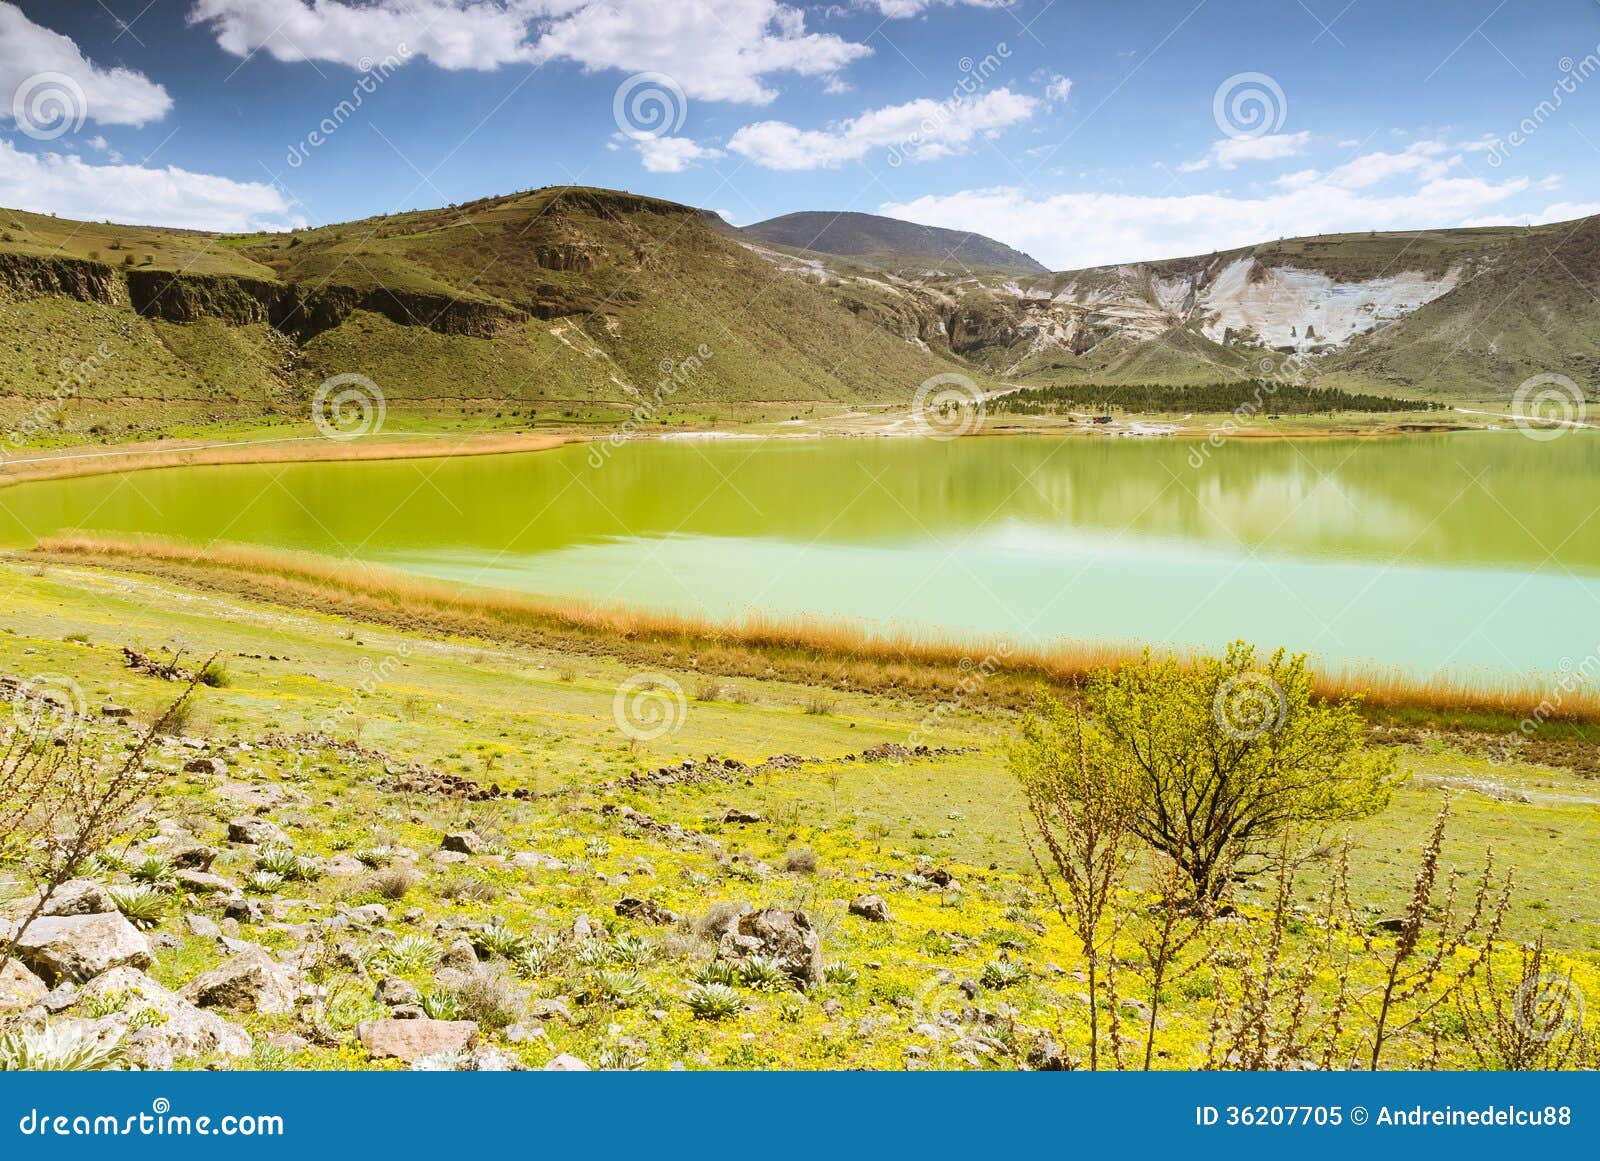 vulcanic lake with blue sky and clouds